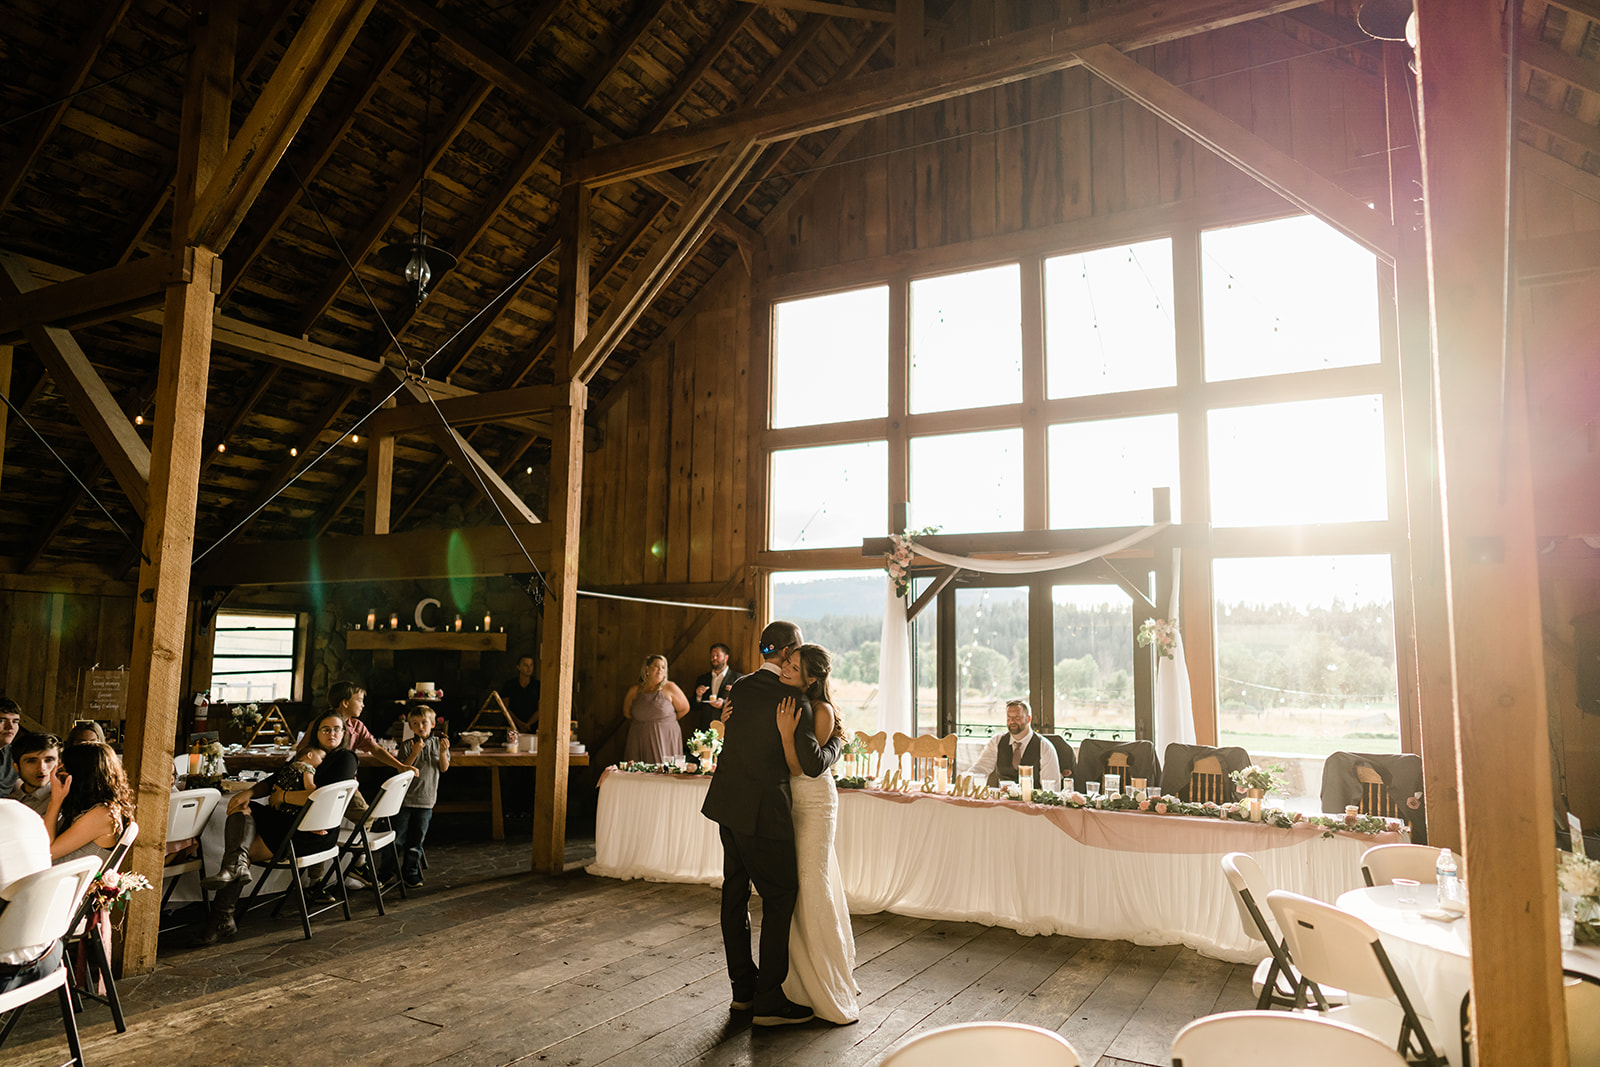 Bride and Groom portrait at a Cattle Barn Wedding